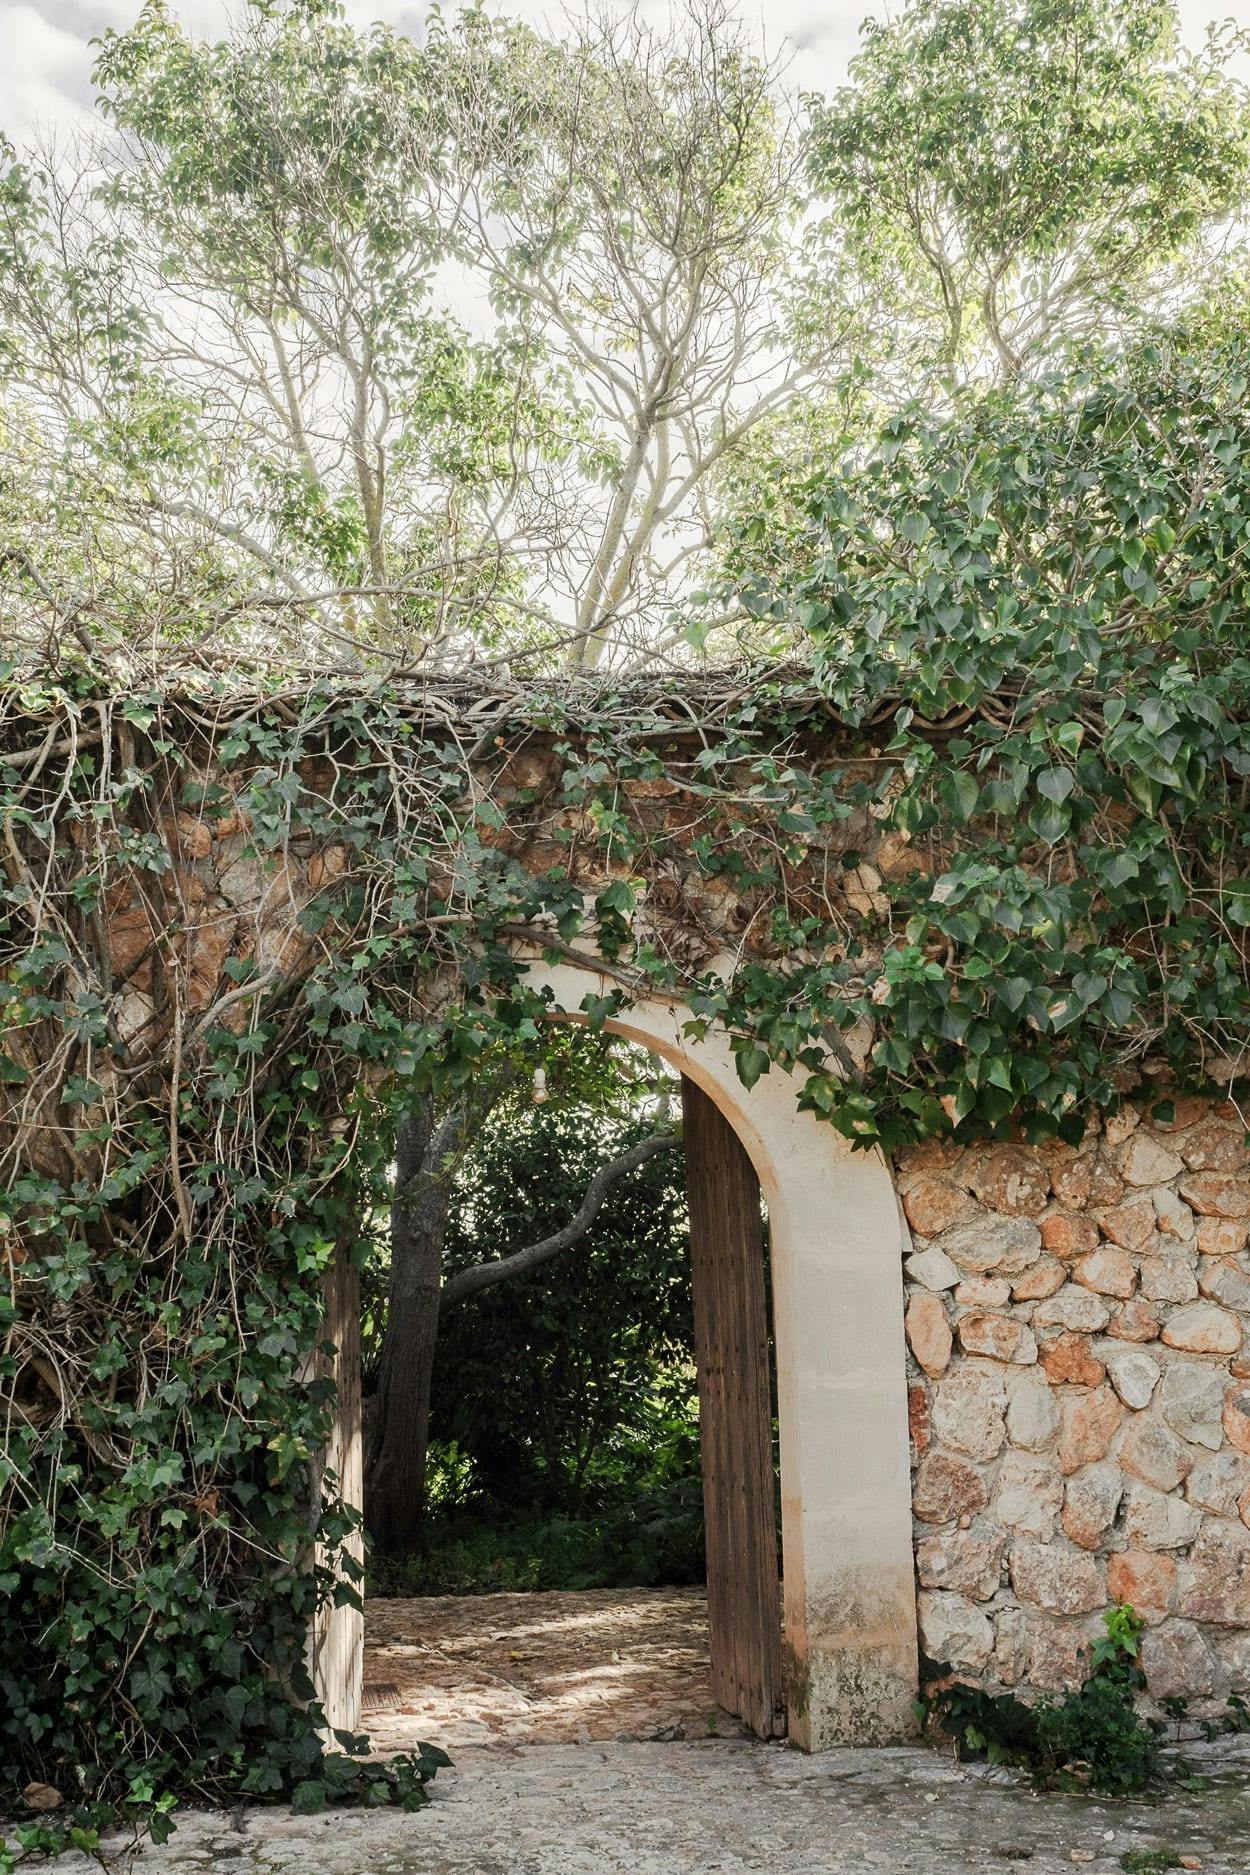 A stone archway with a vine-covered archway is surrounded by trees, creating a serene and picturesque scene.